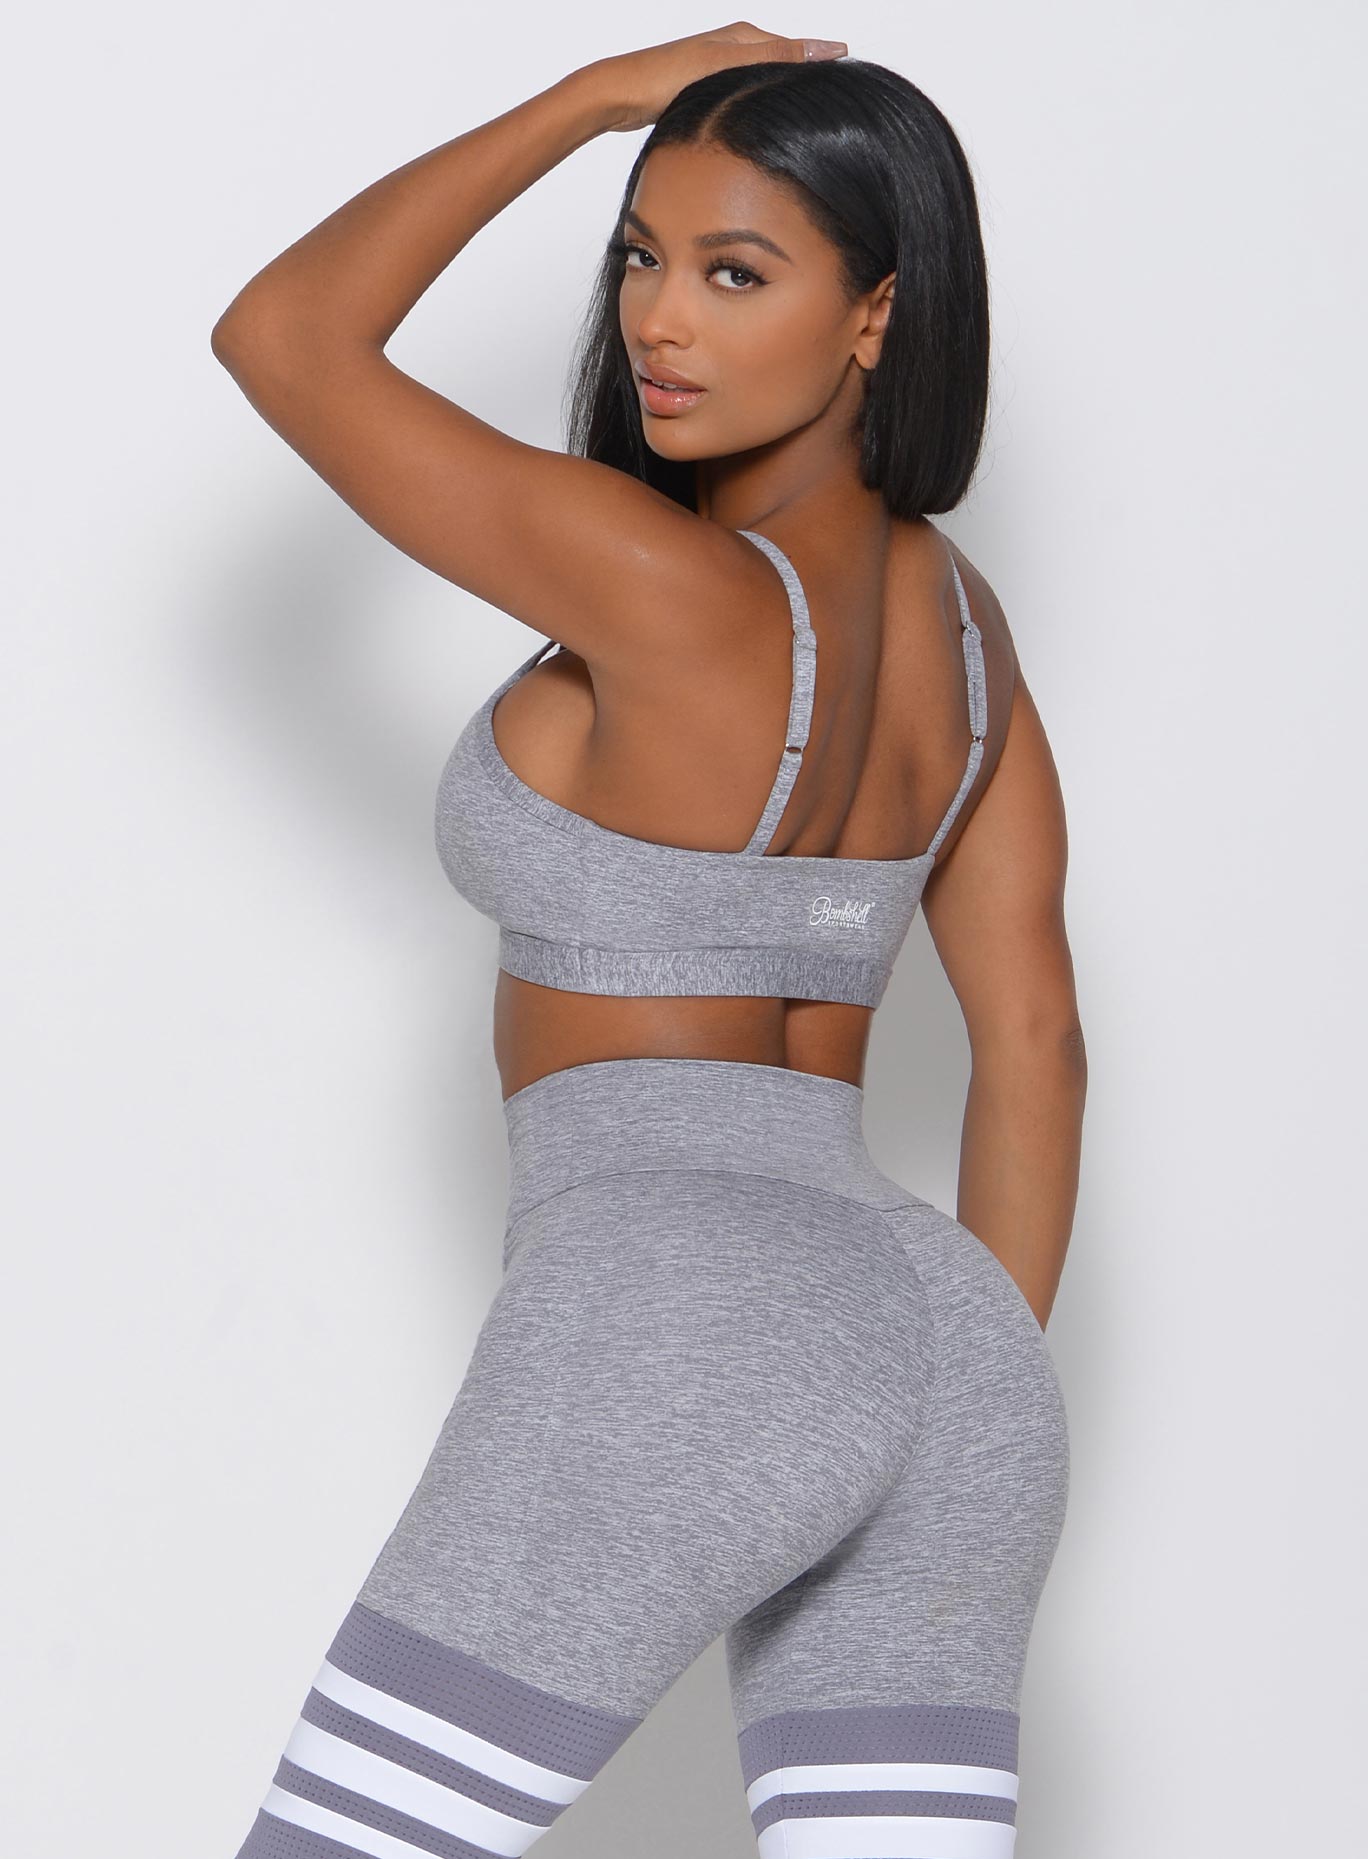 Back view of the model in a gray sports bra 